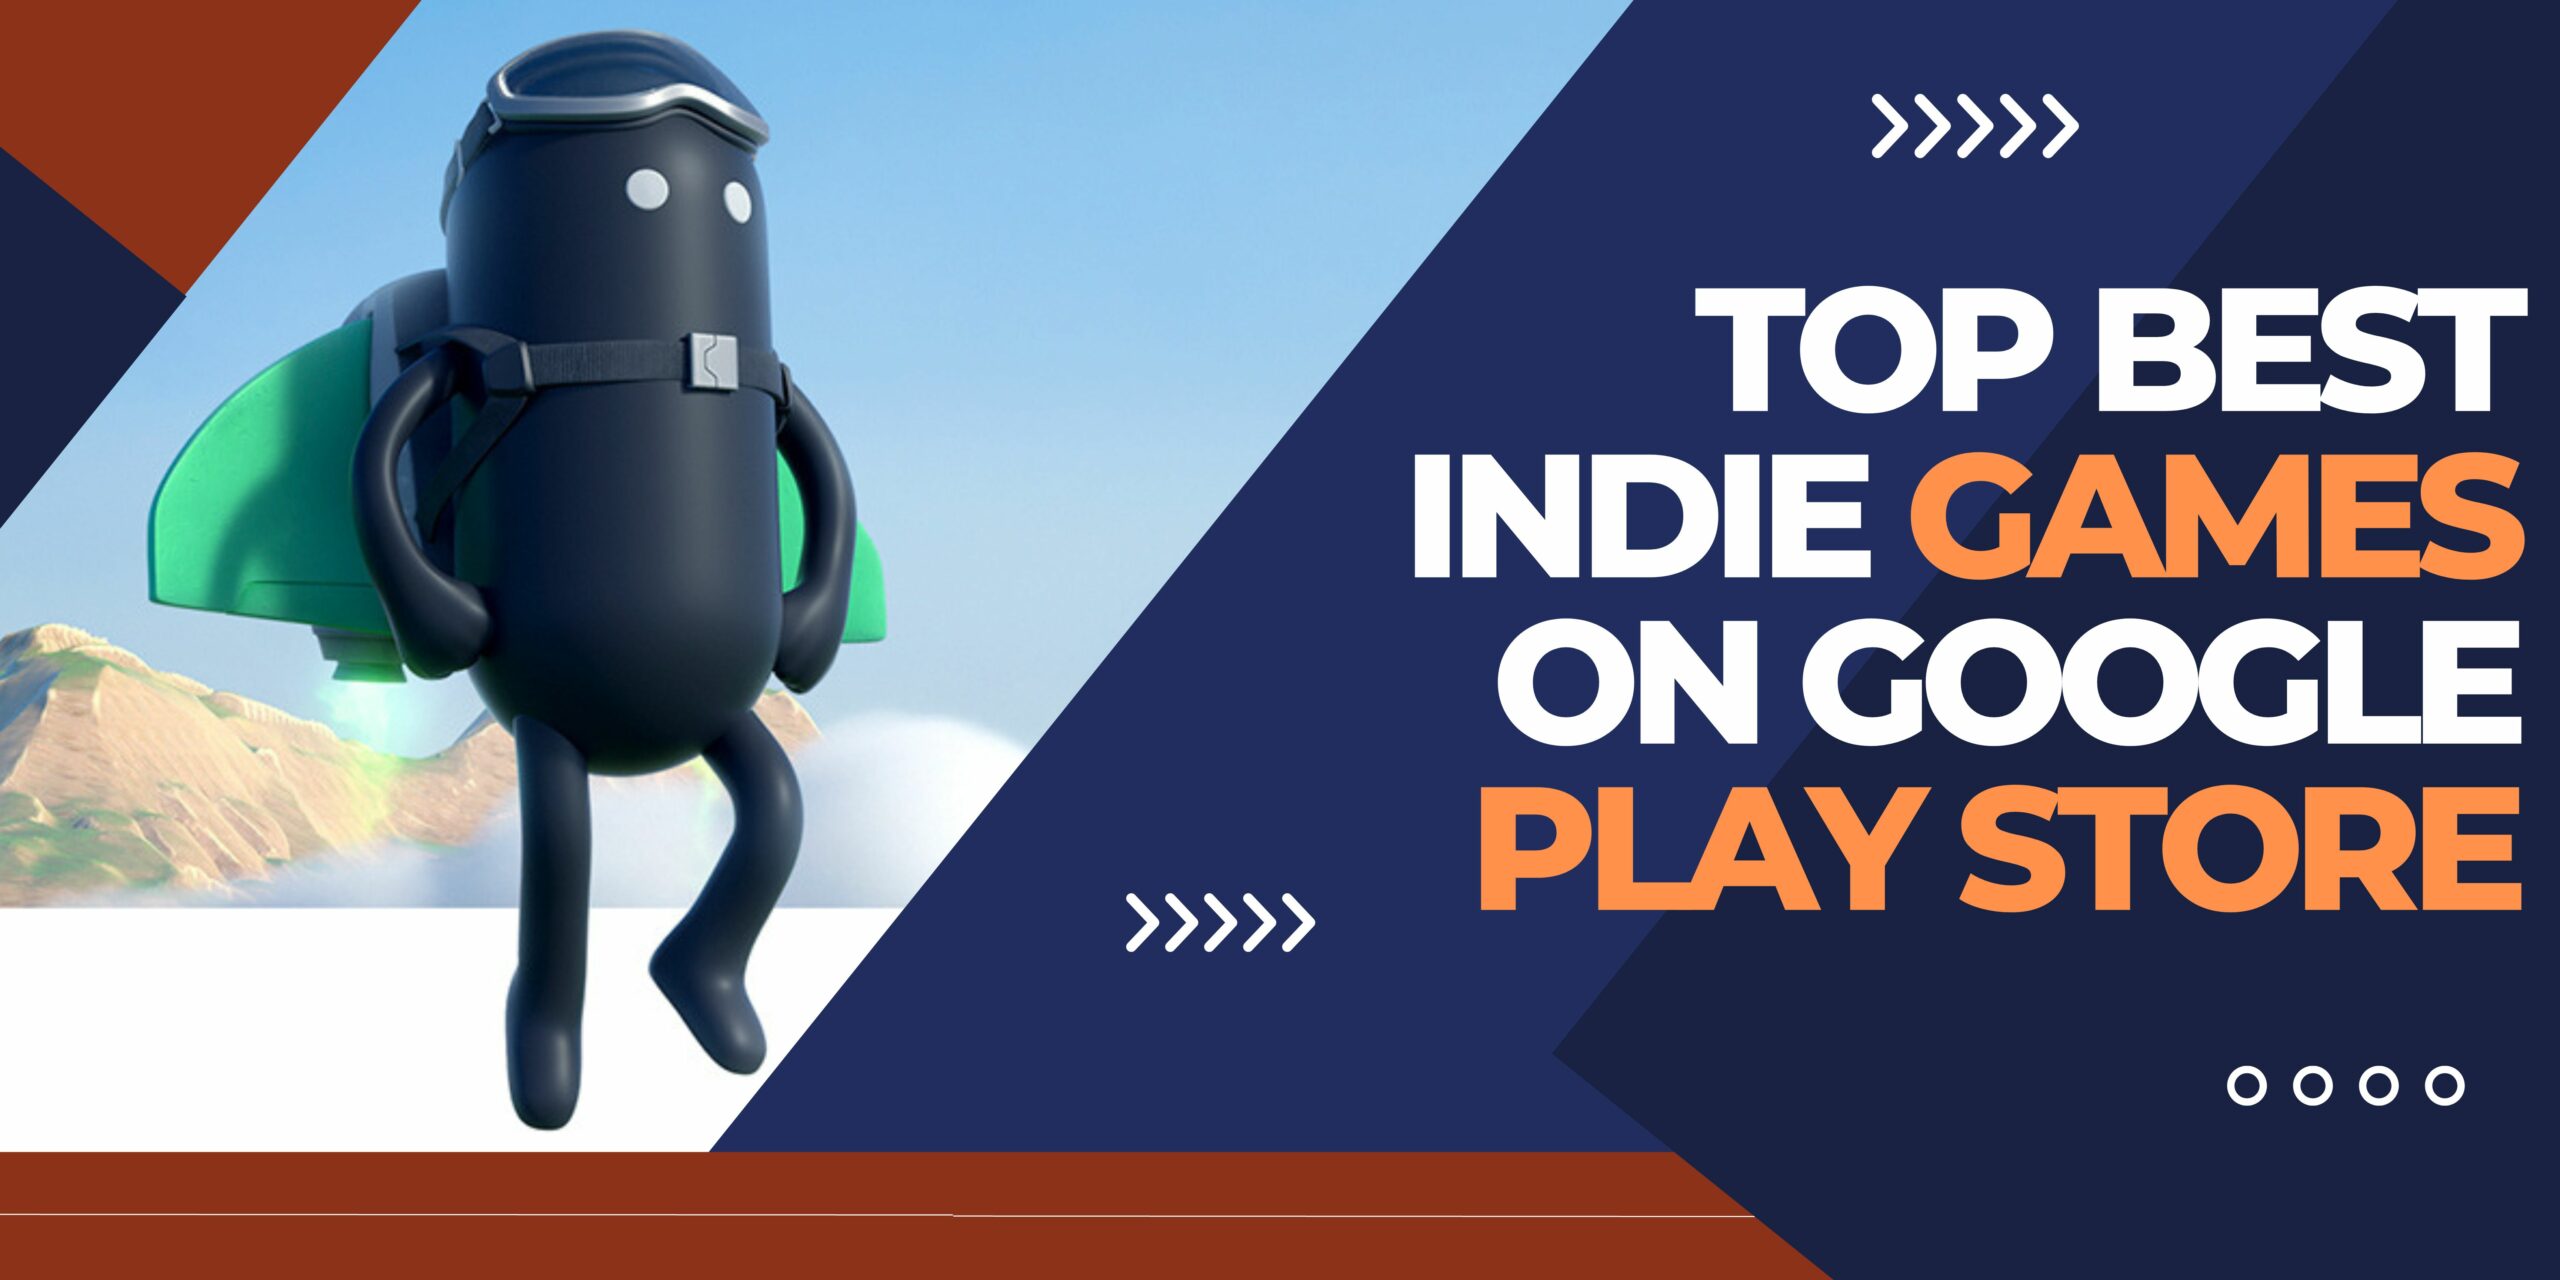 an image of Top Best Indie Games on Google Play Store